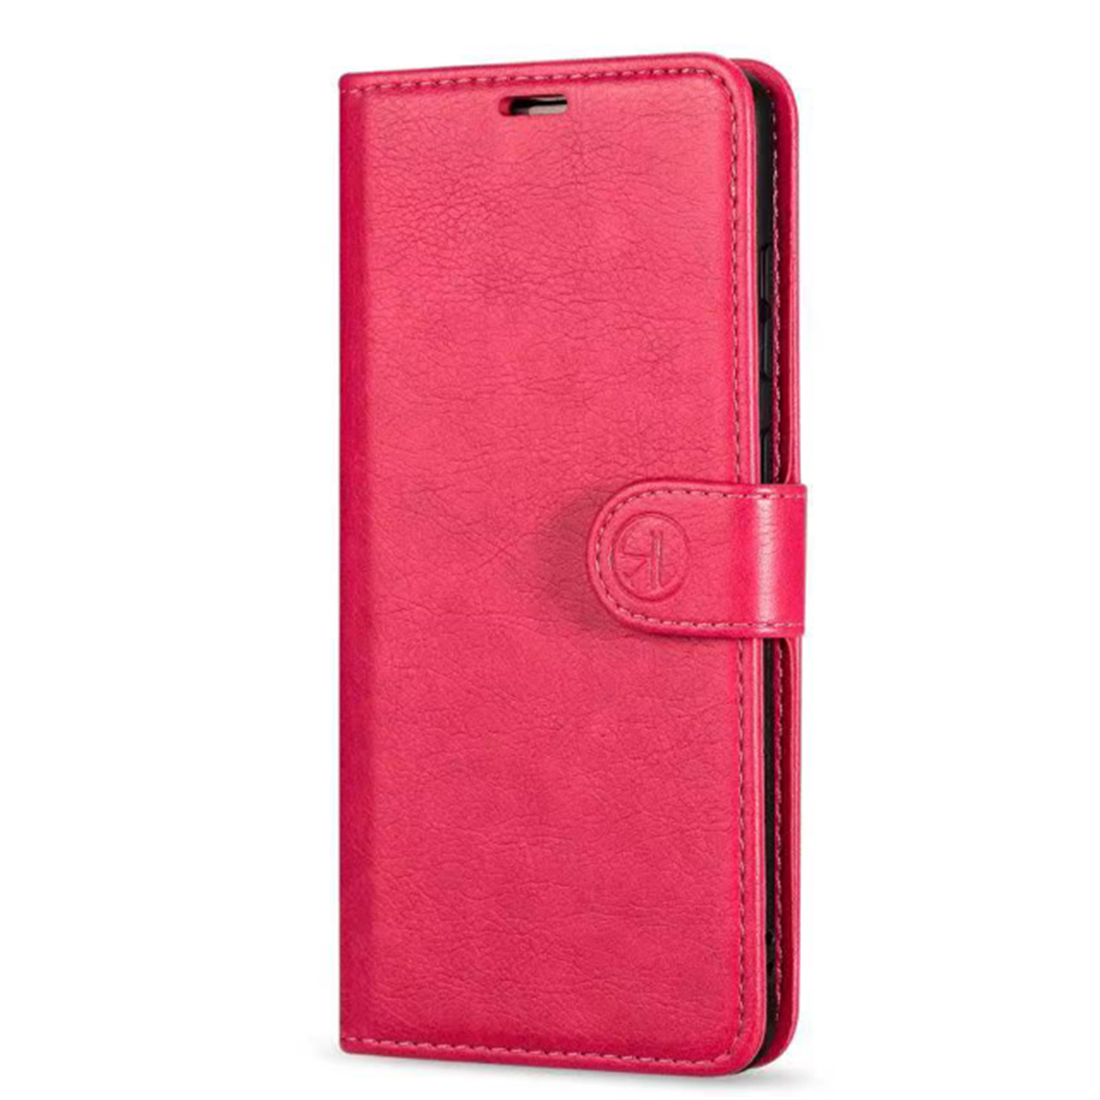 Apple iPhone 11 pro artificial leather Pink Book Case